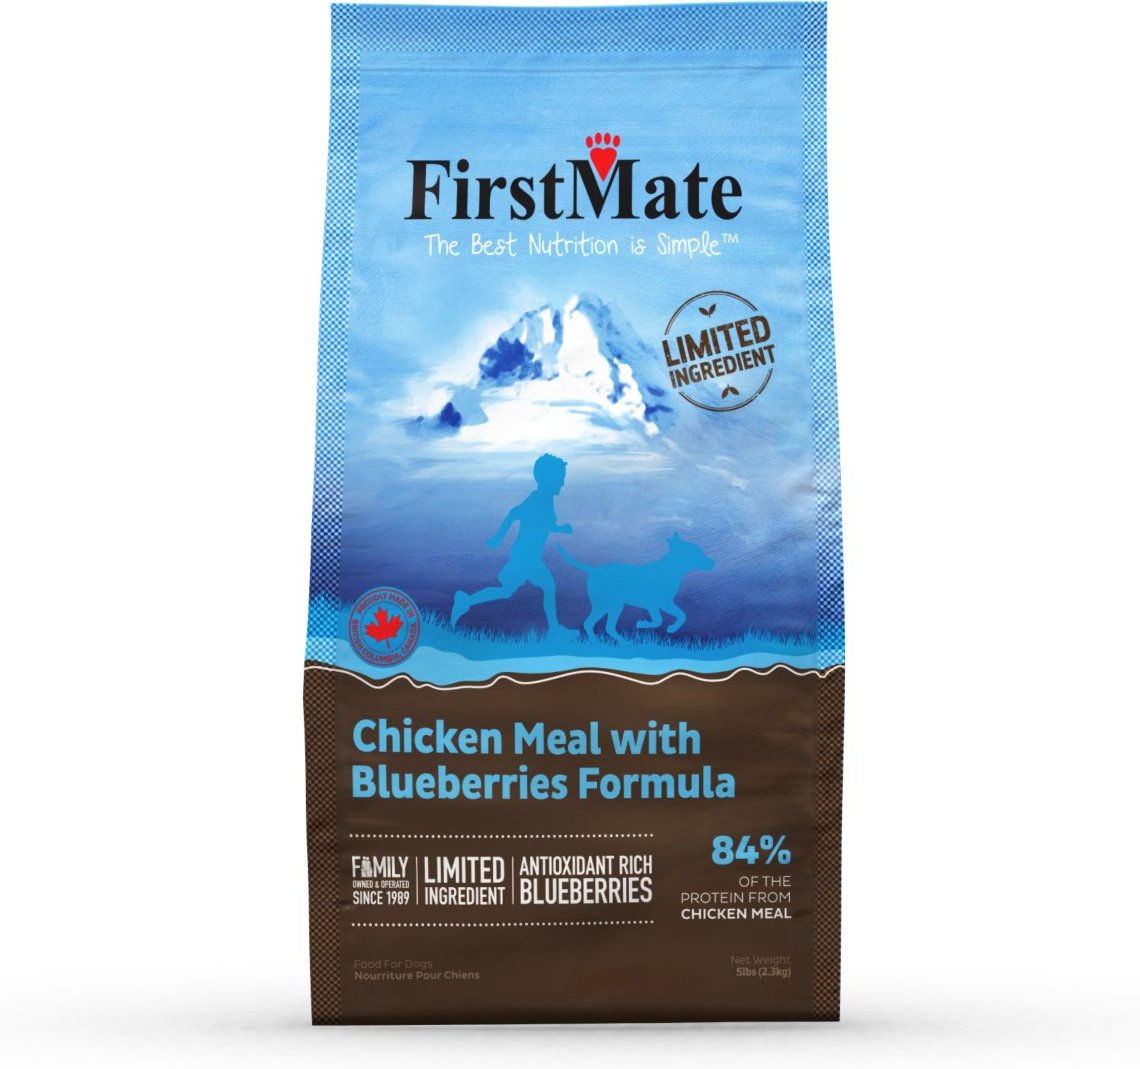 FirstMate Limited Ingredient Chicken Meal, Blueberries